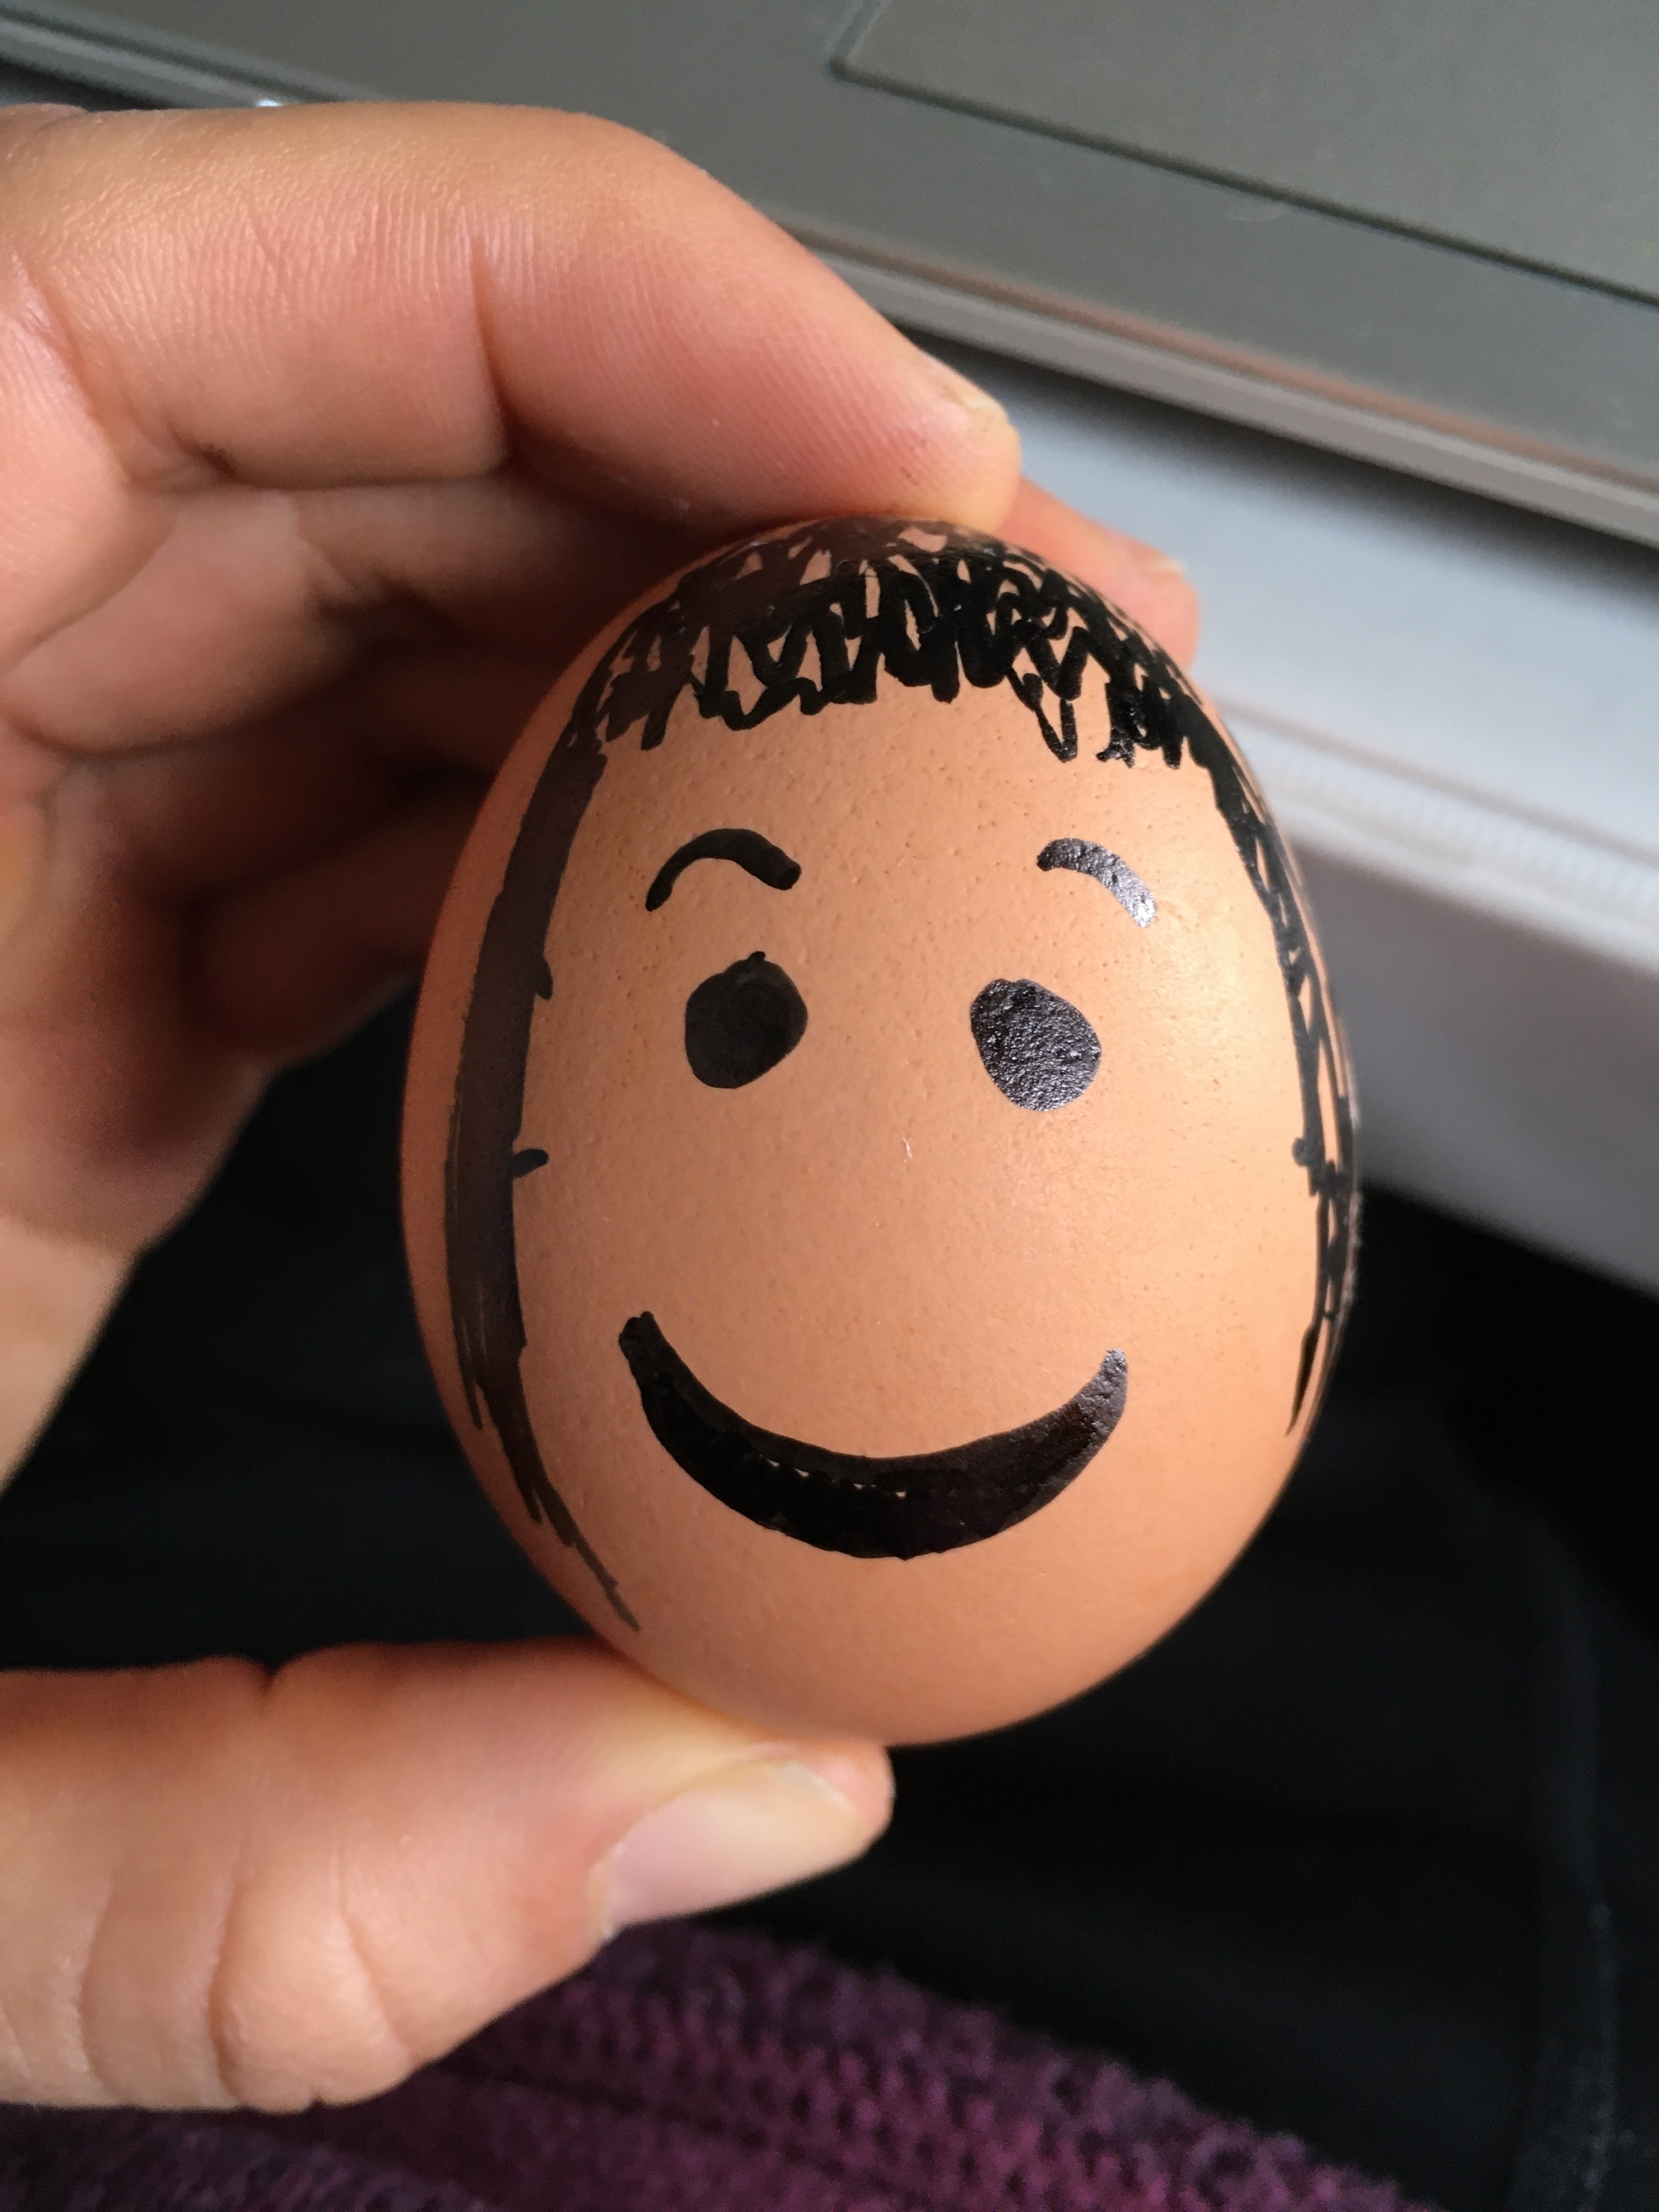 An egg with a happy face drawn on it.